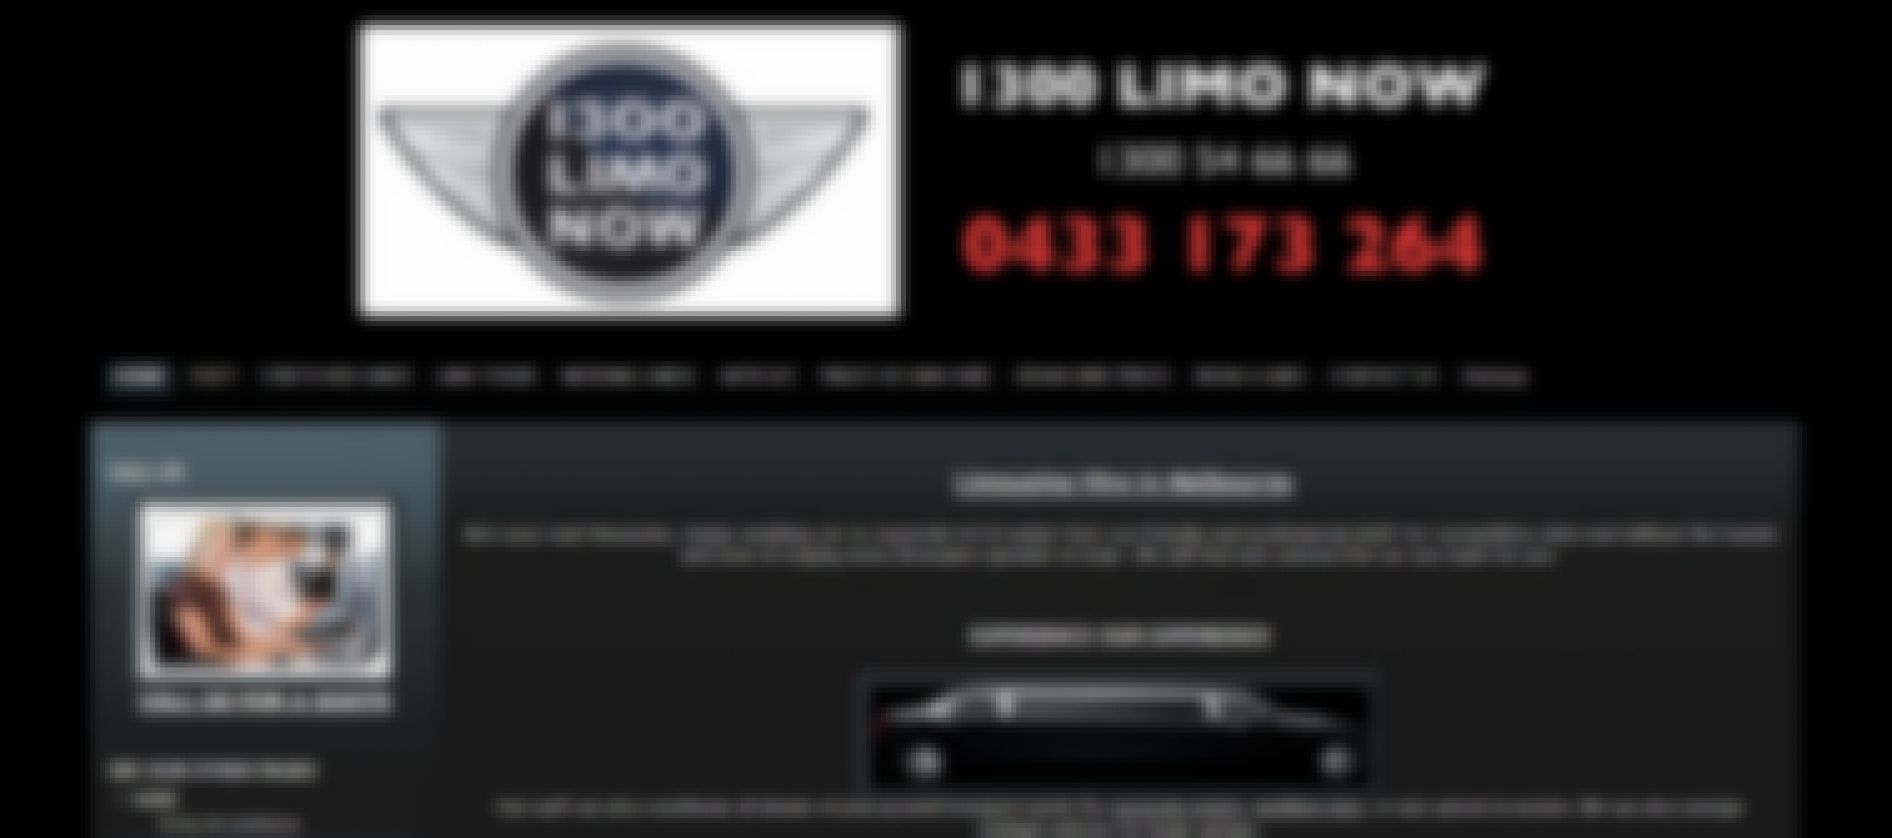 1300 limo now & hummer hire melbourne